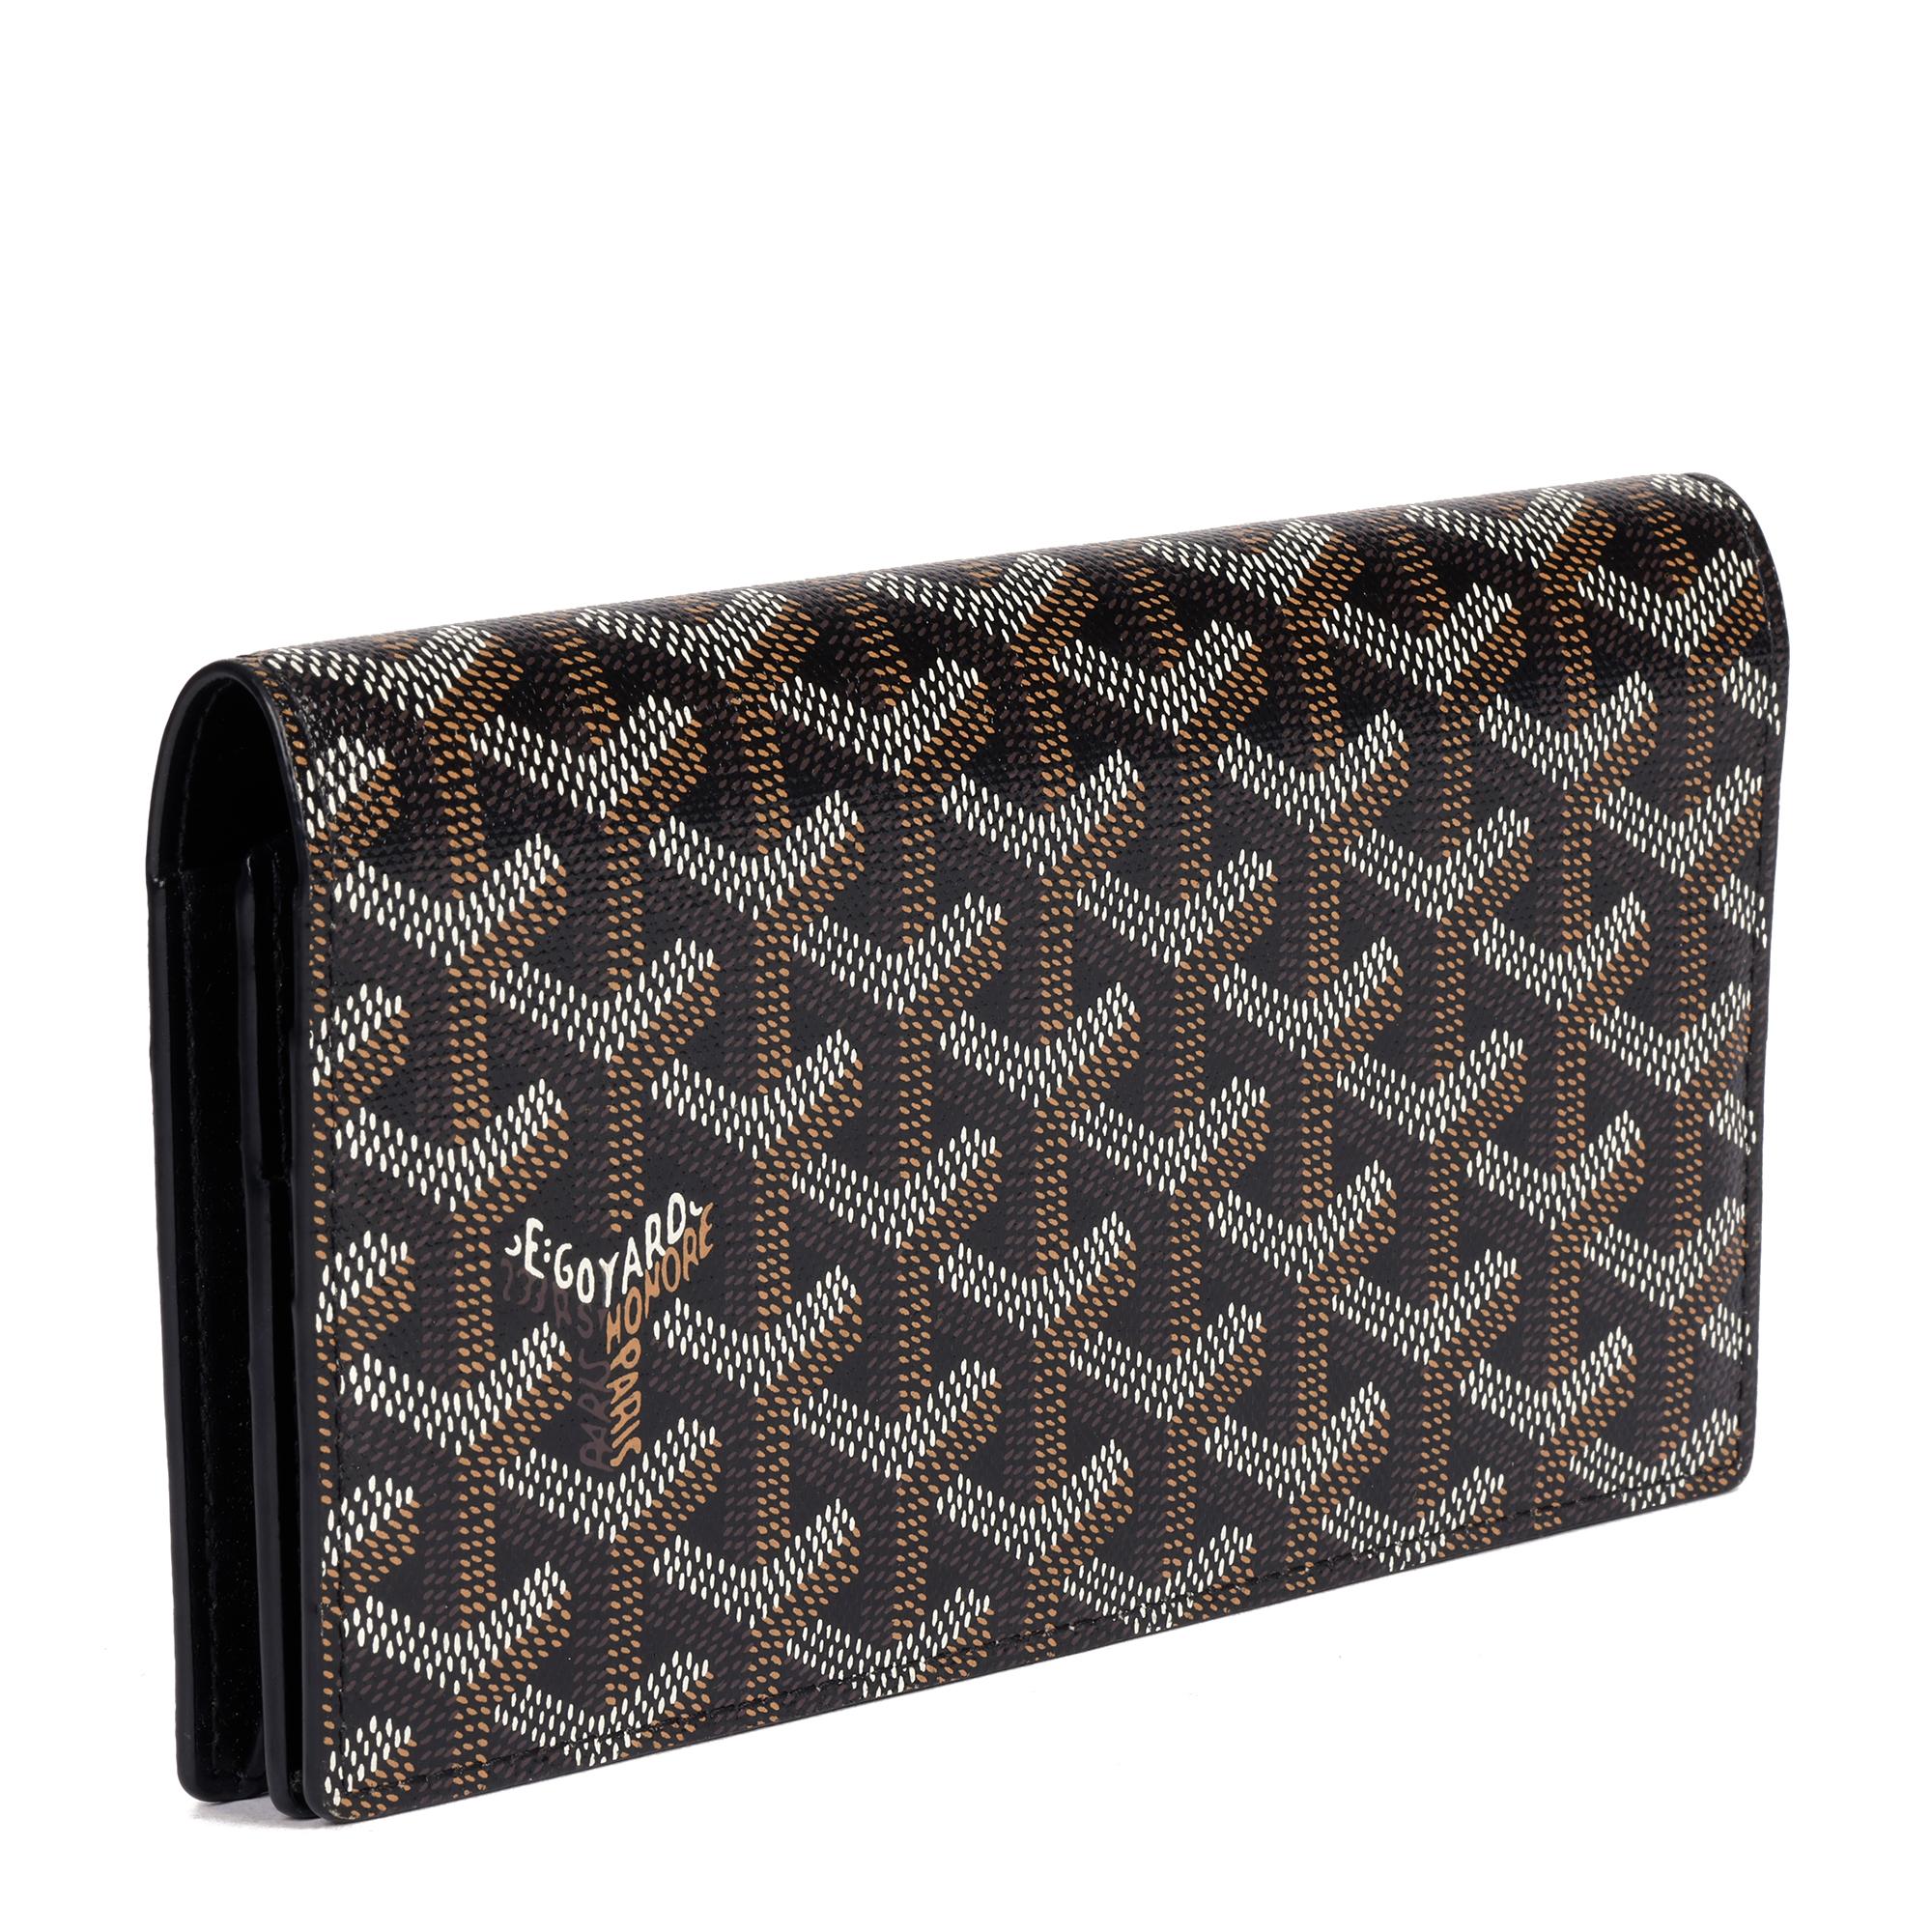 GOYARD
Black Monogram Coated Canvas Richeileu Wallet

Xupes Reference: CB350
Serial Number: 
Age (Circa): 2010
Accompanied By: Goyard Box, Protective Felt, Care Booklet
Authenticity Details: Made in France
Gender: Unisex
Type: Accessory

Colour: